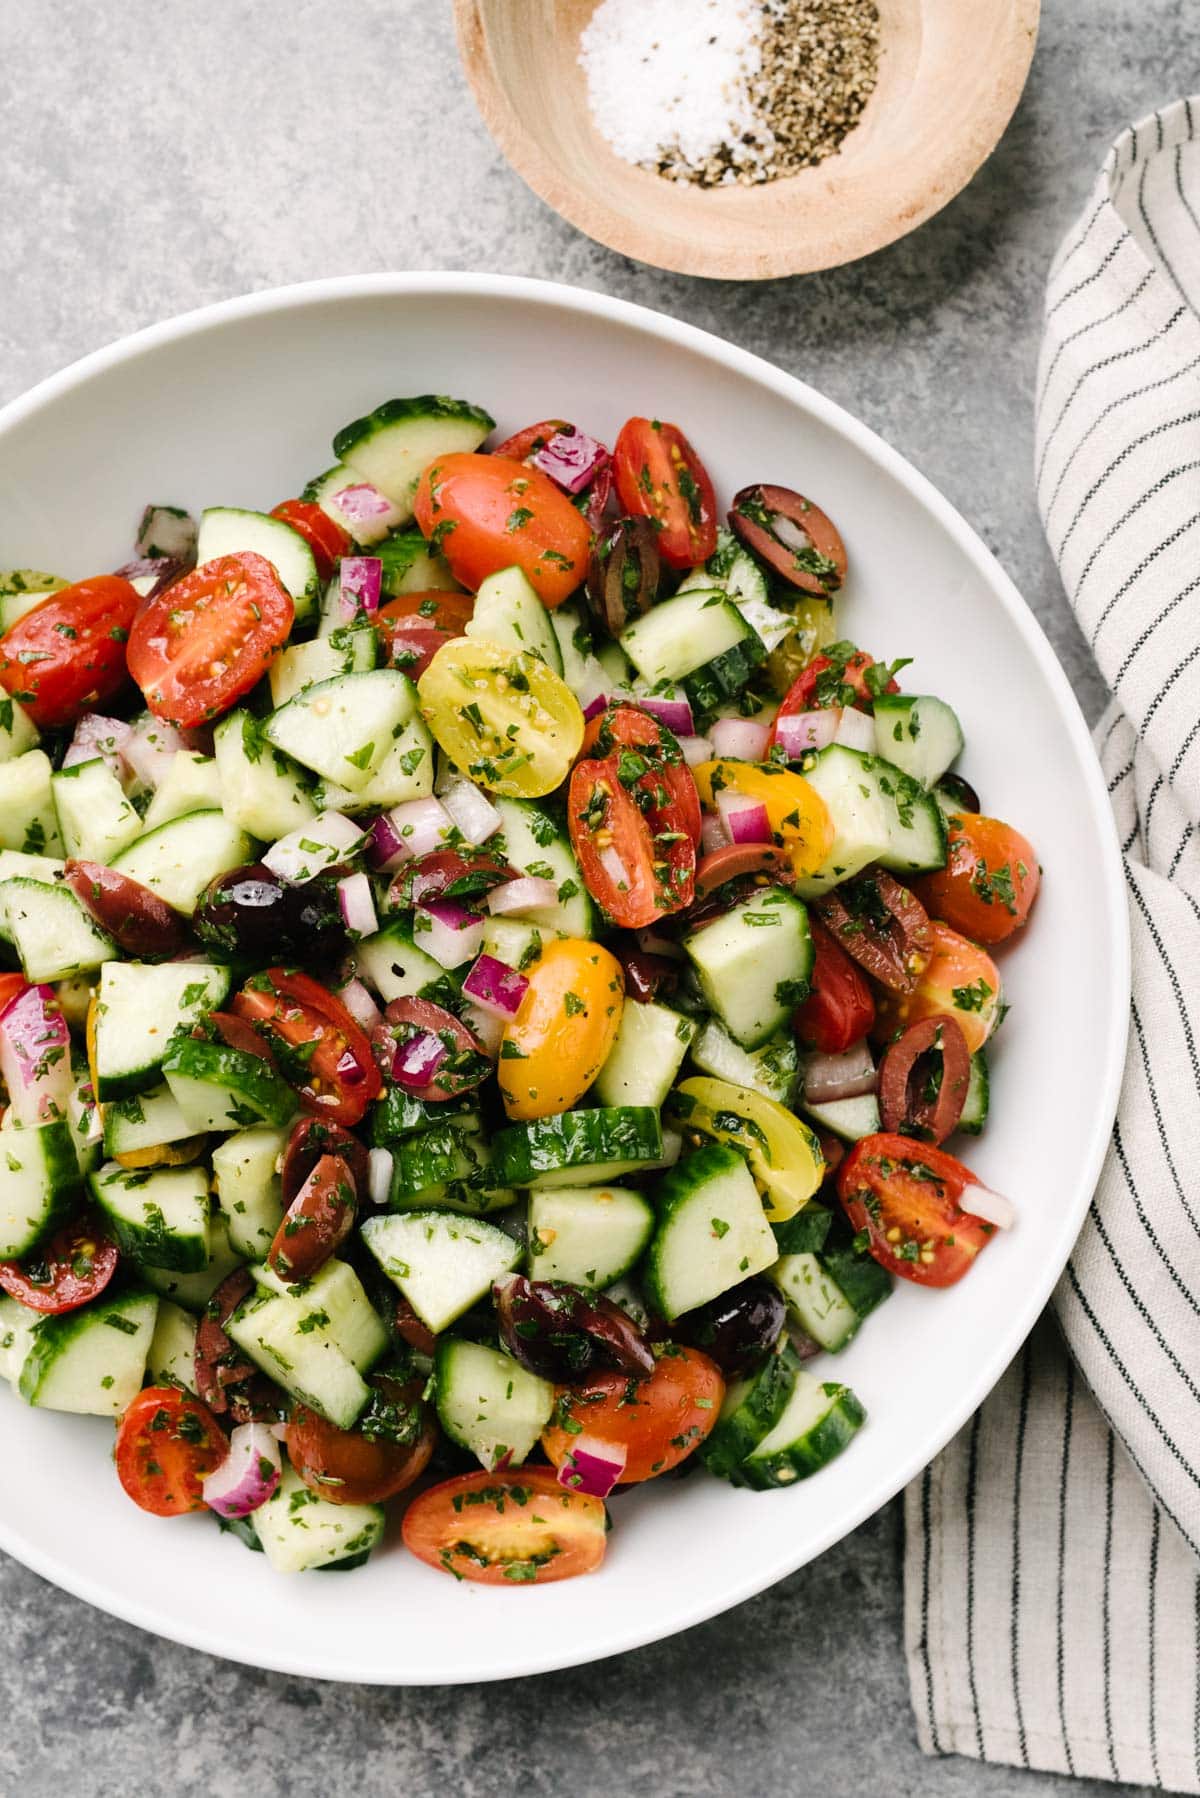 Mediterranean cucumber salad in a large white serving bowl on a concrete background with a striped linen napkin and small wood bowl filled with salt and pepper for seasoning.